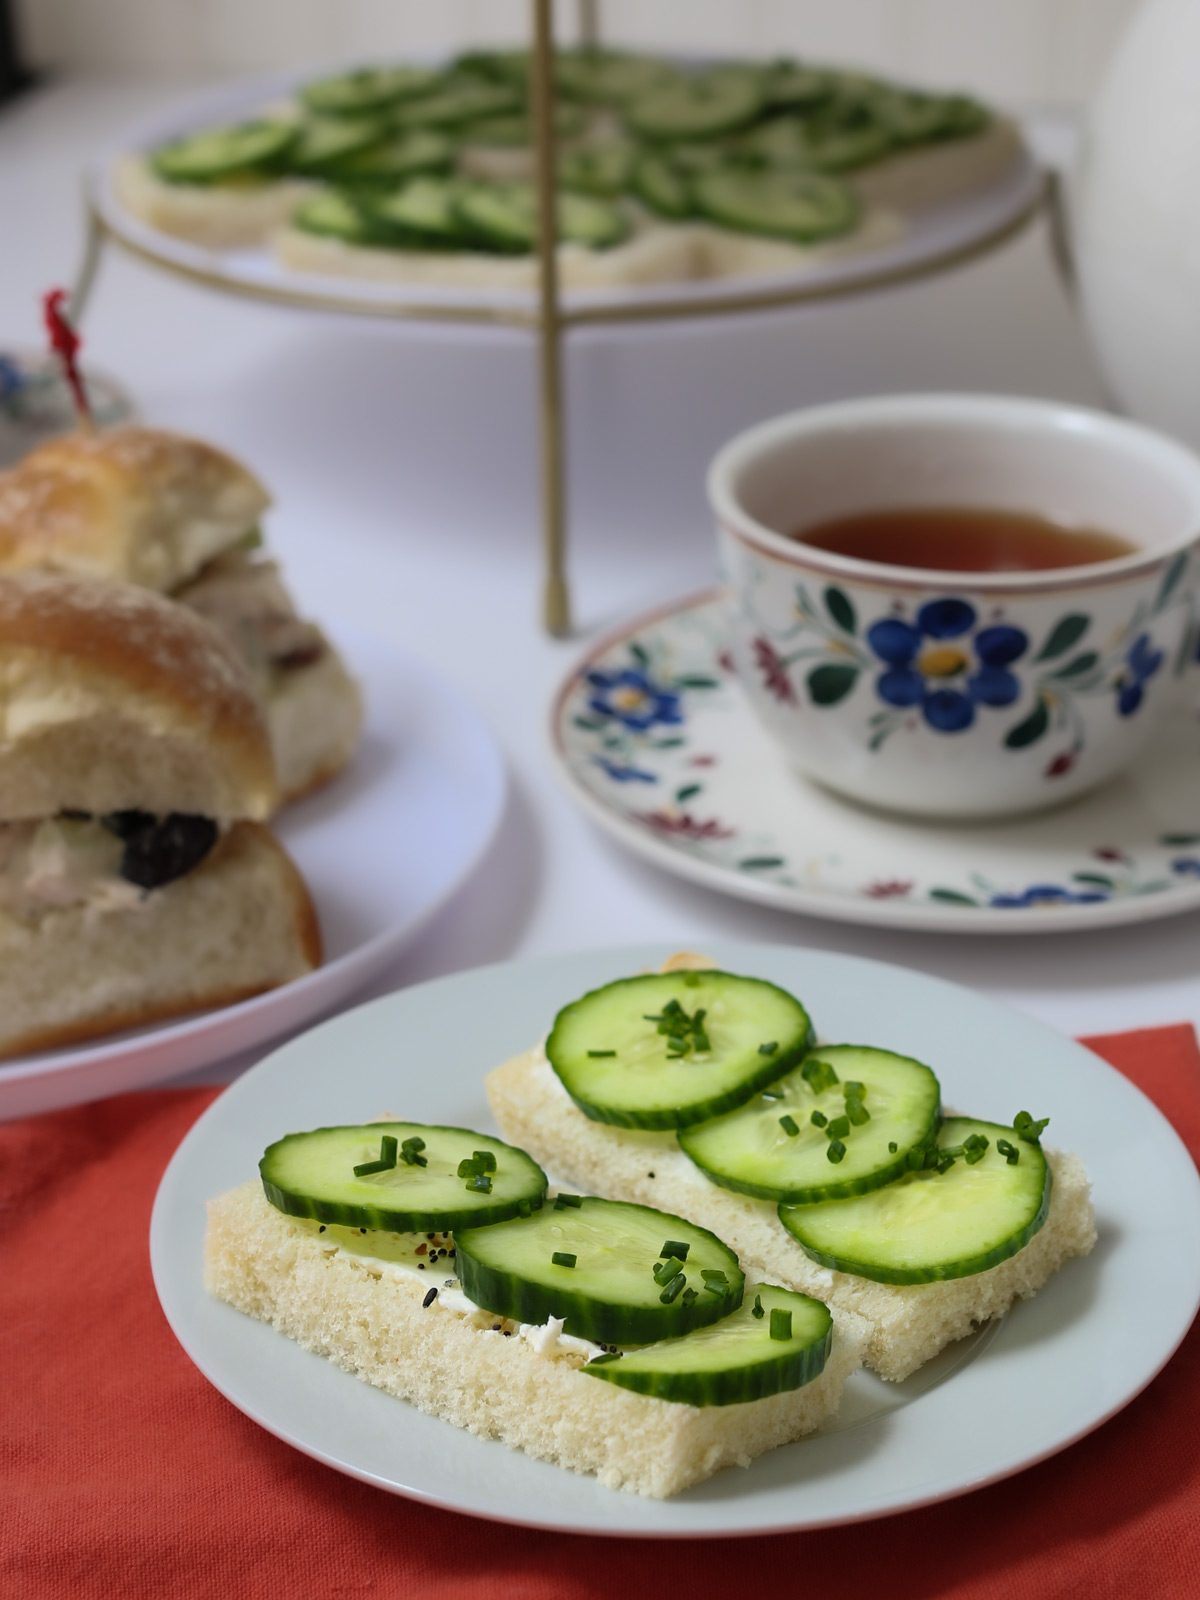 plate of cucumber sandwiches near tea cup and saucer on tea table.